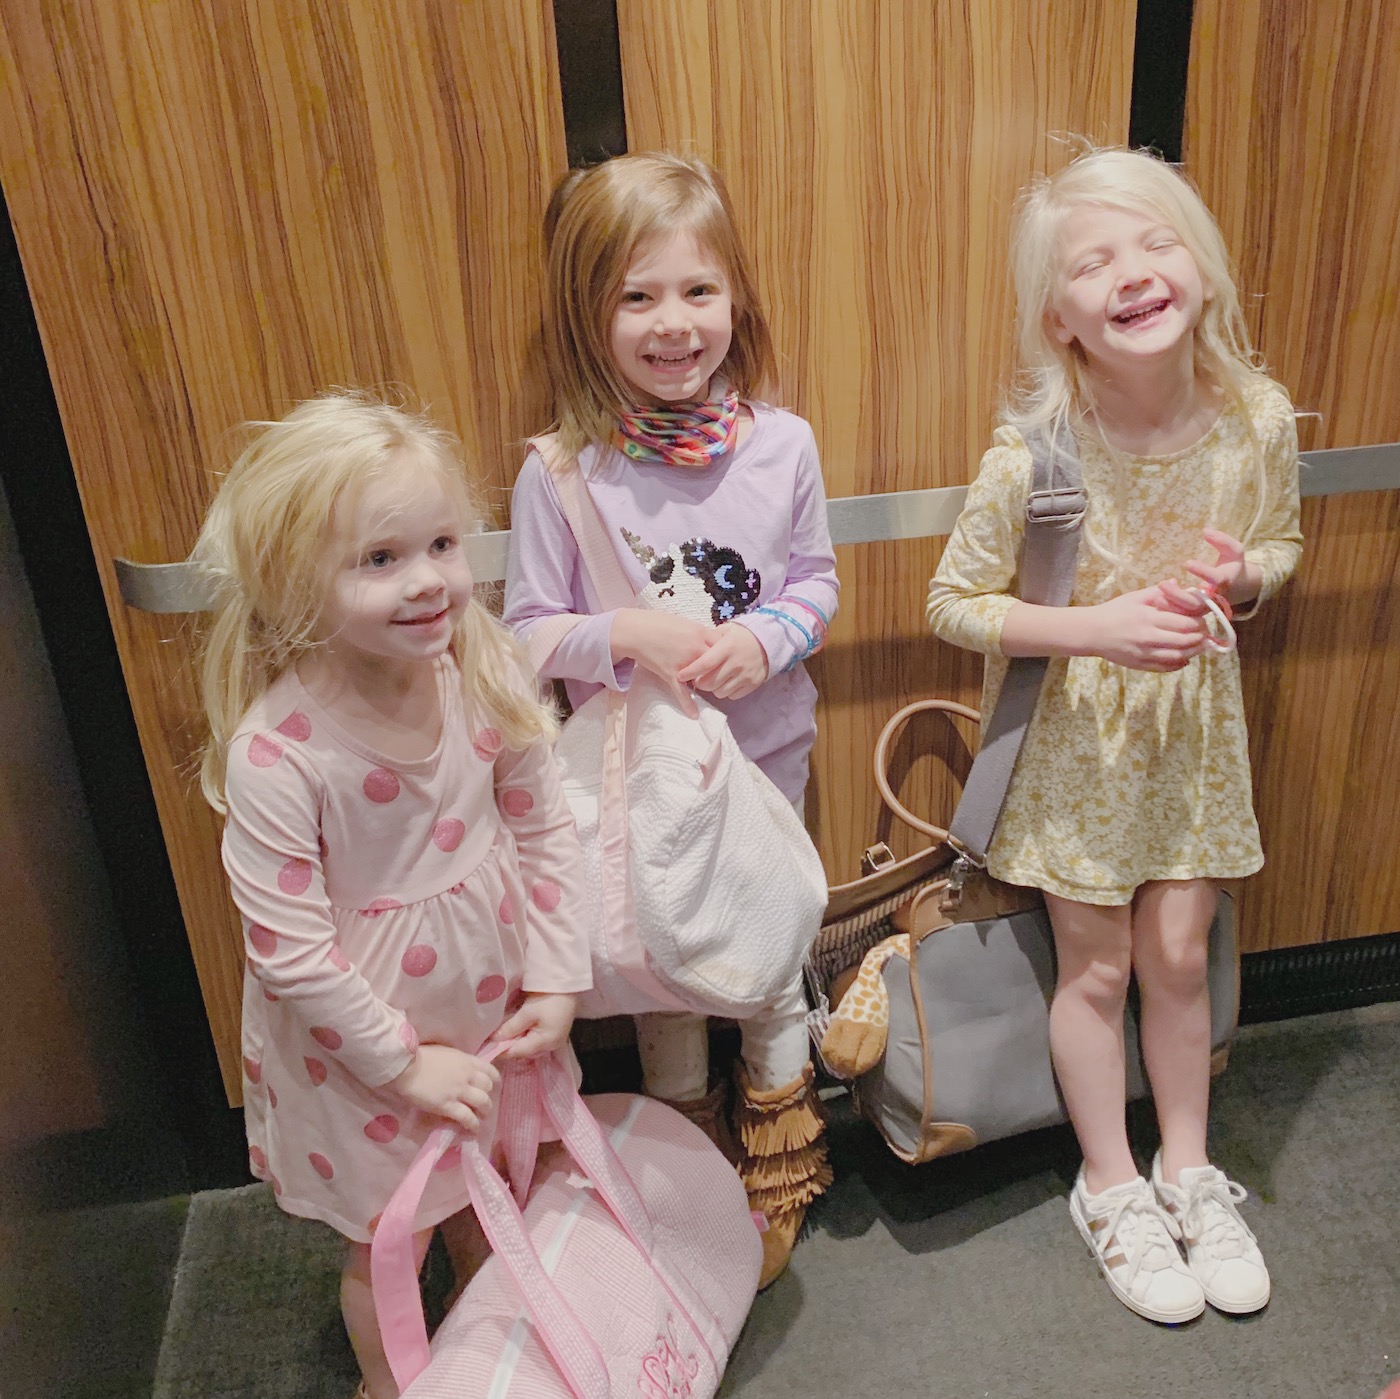 A Girly Staycation at The Township in Ridgeland, MS